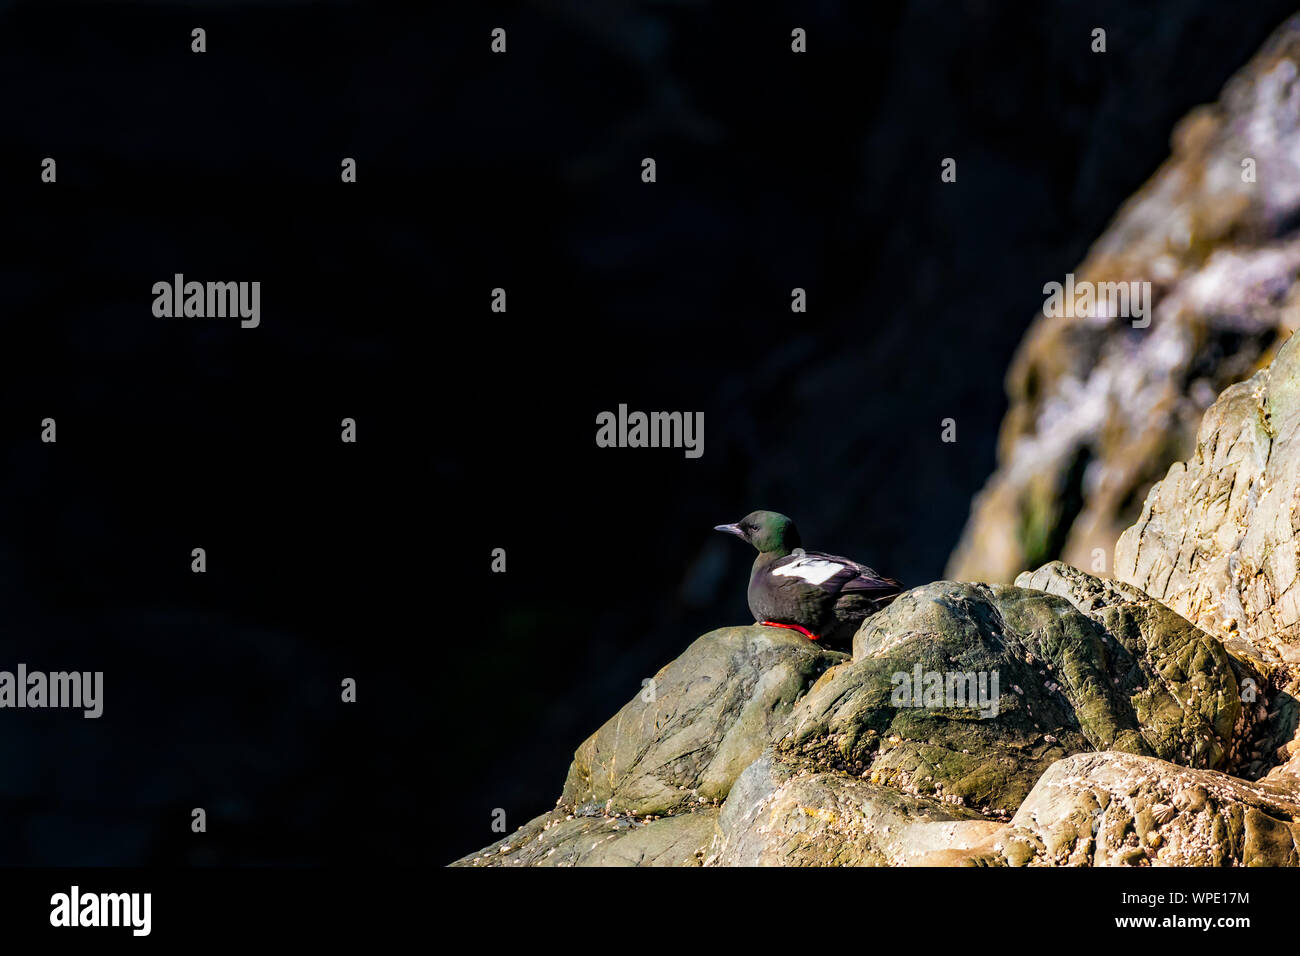 Loneliness concept in wildlife. Single guillemot sitting on the rocky cliff  just off the sea. Bray Head, co.Wicklow, Ireland. Stock Photo